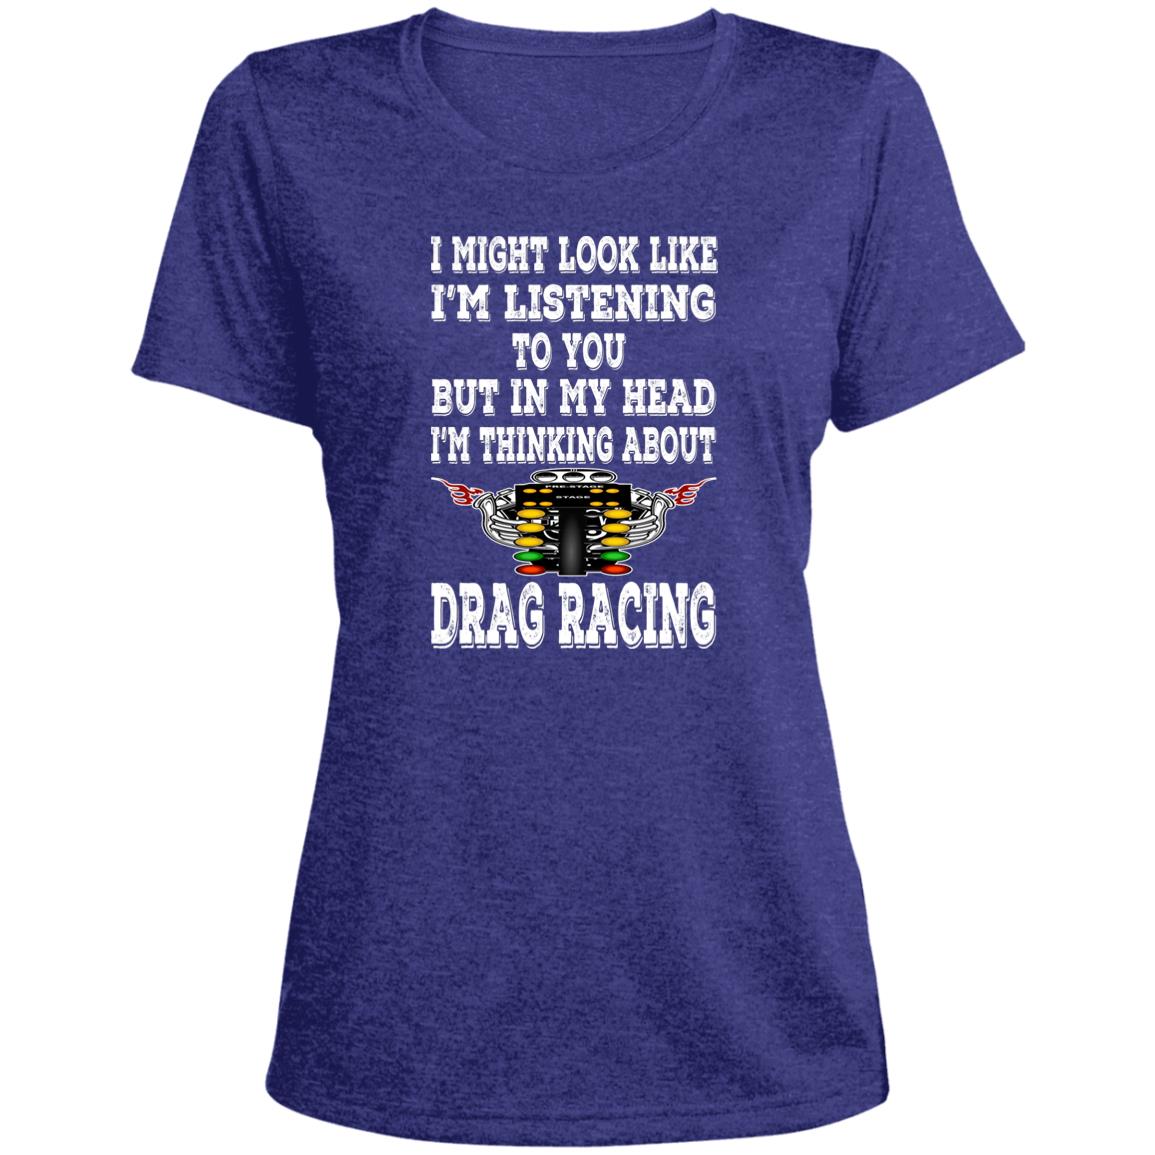 I Might look Like I'm Listening To You Drag Racing Ladies' Heather Scoop Neck Performance Tee